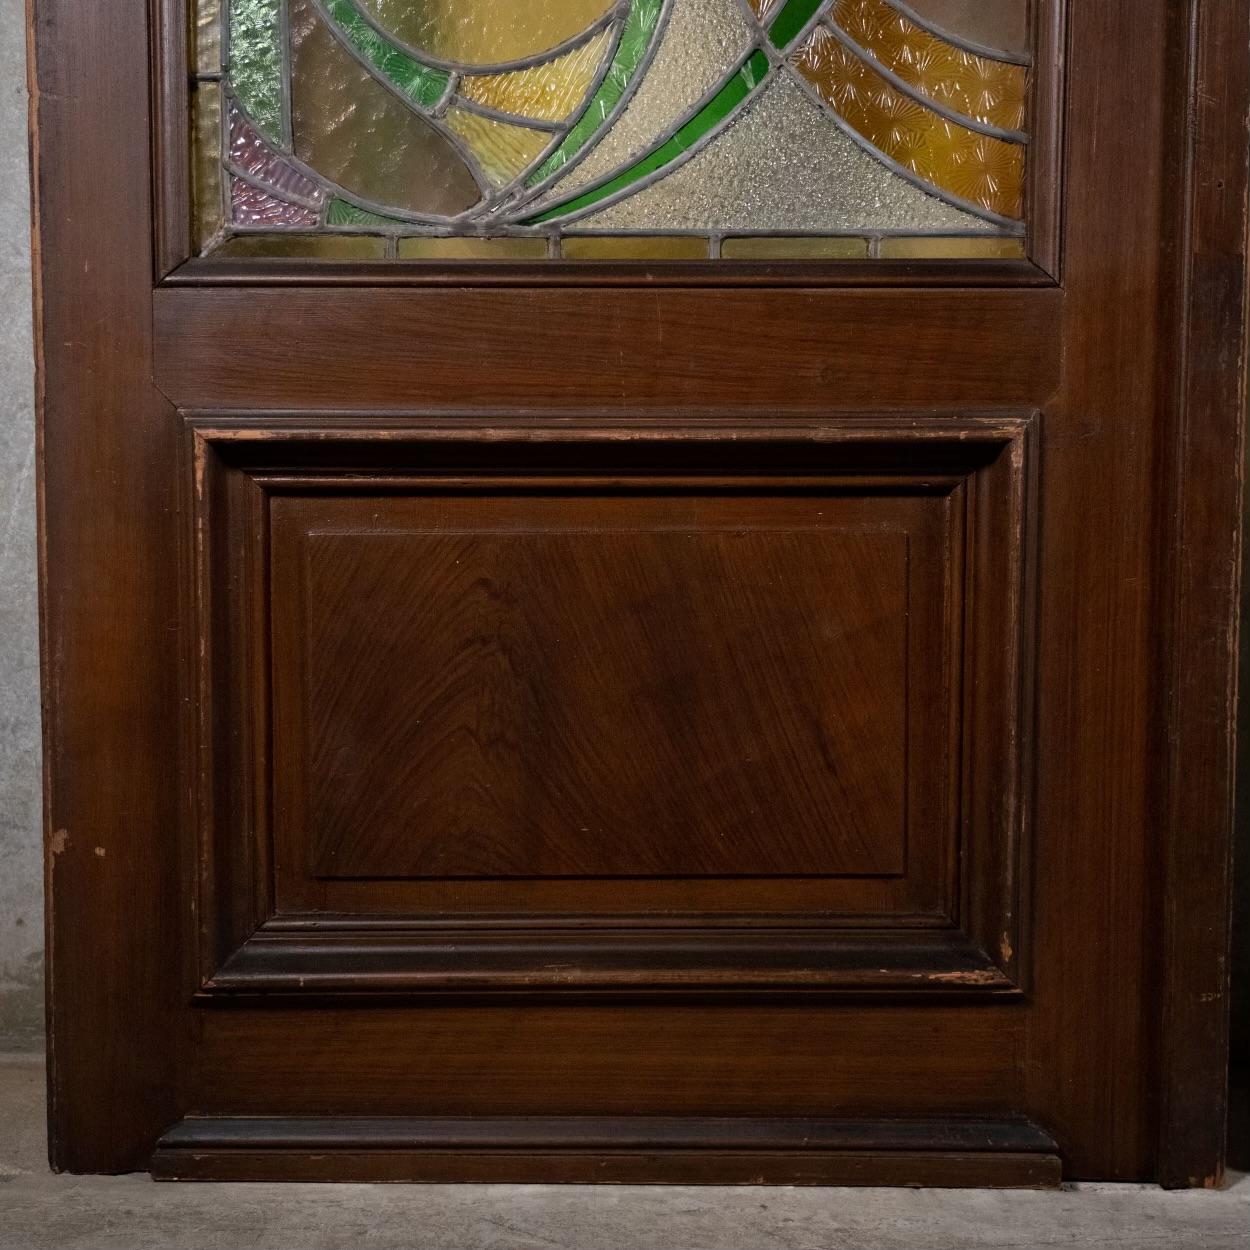 19th century large French stain glass door set  For Sale 1